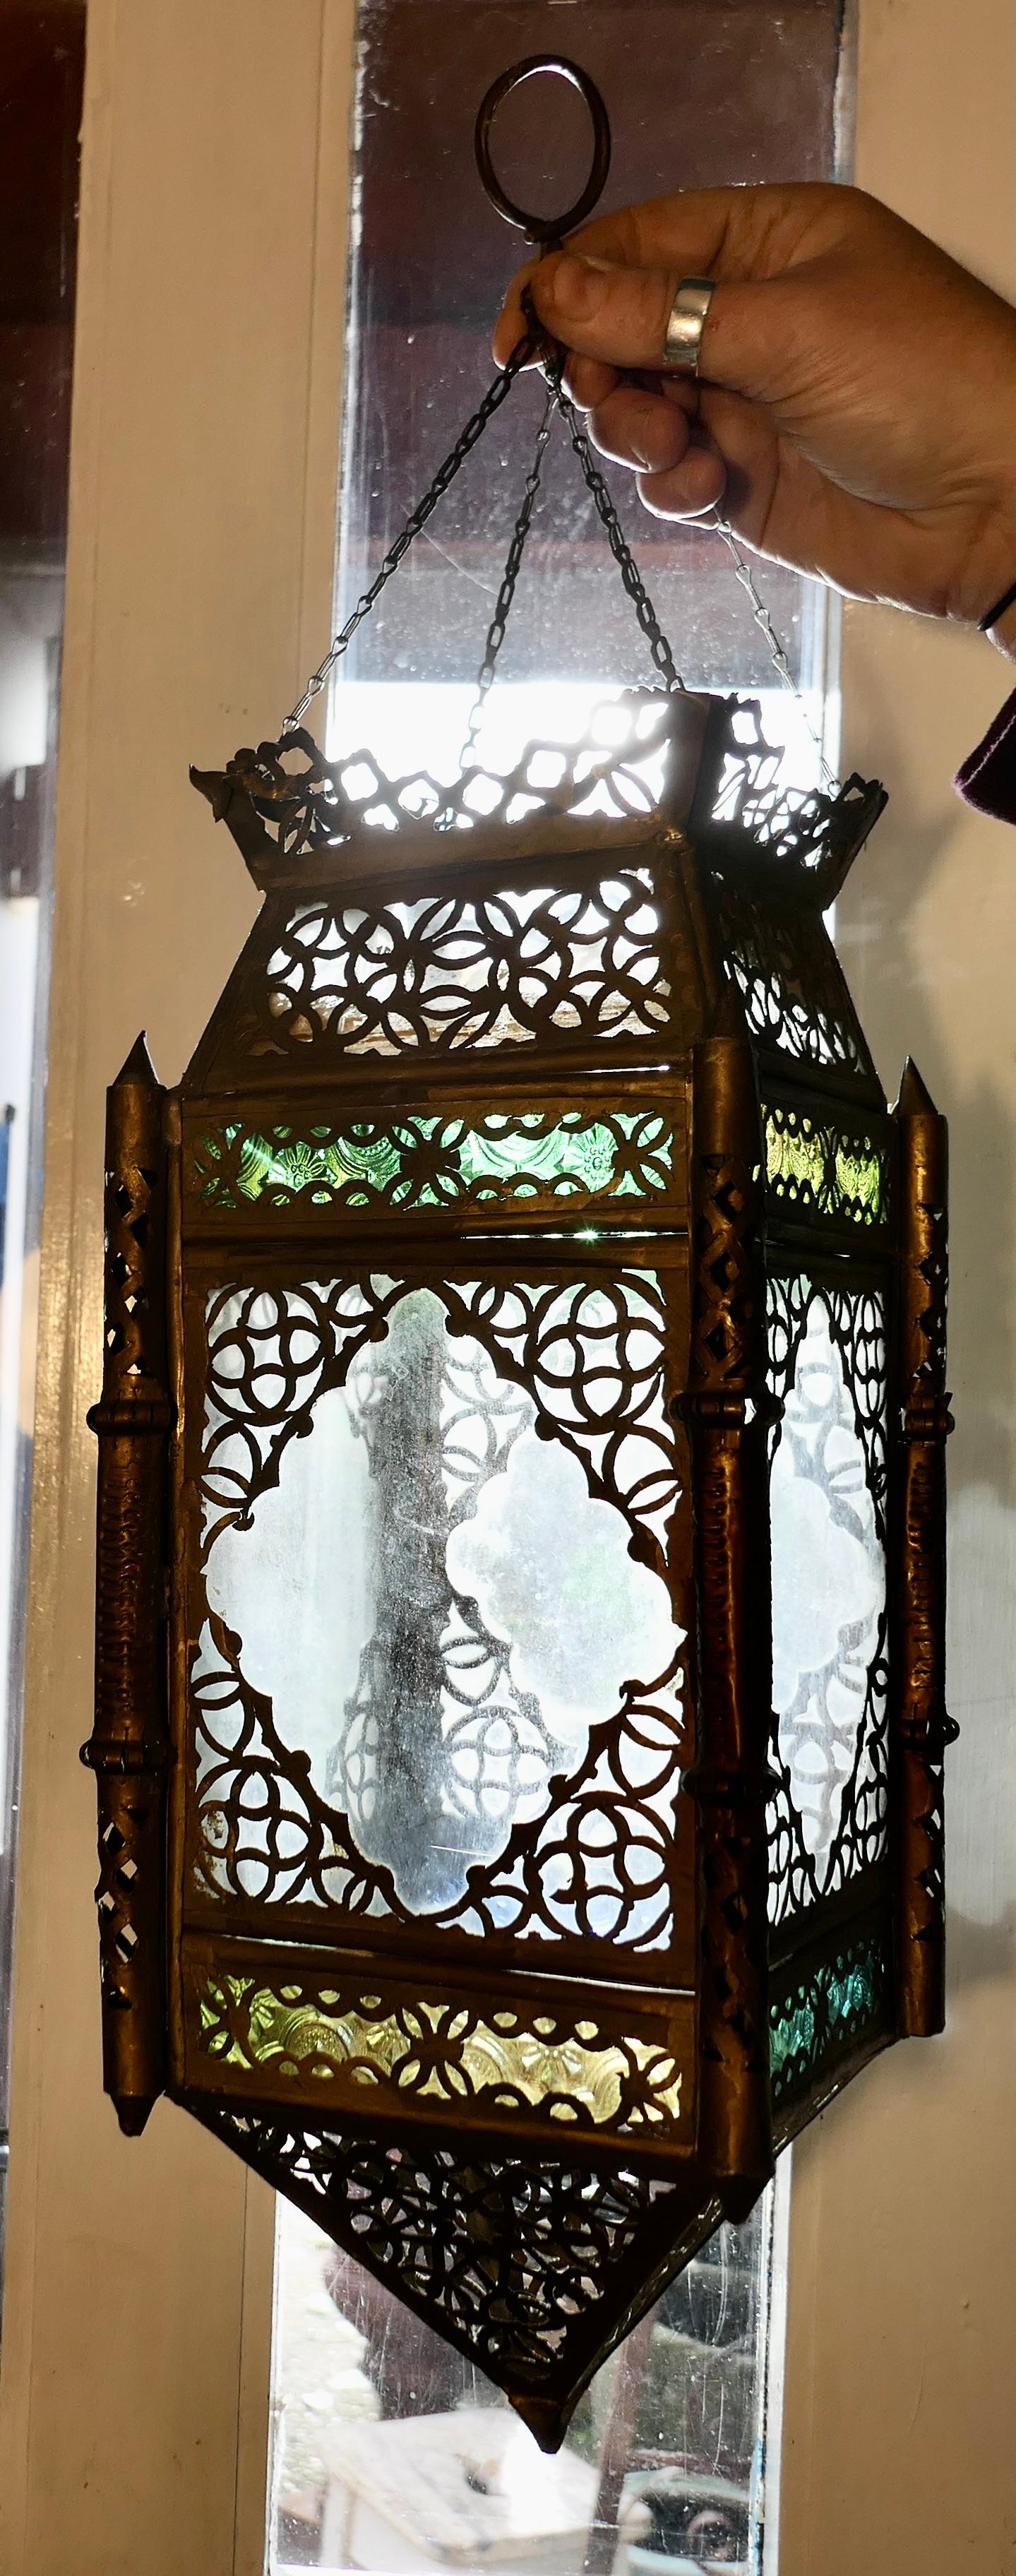 North African stained glass and brass hanging lantern shade

This is a lovely piece, it is rectangular in shape with diamond glass panels decorated with filigree brass work and small stained glass panels in Amber and Green. The lantern hangs on